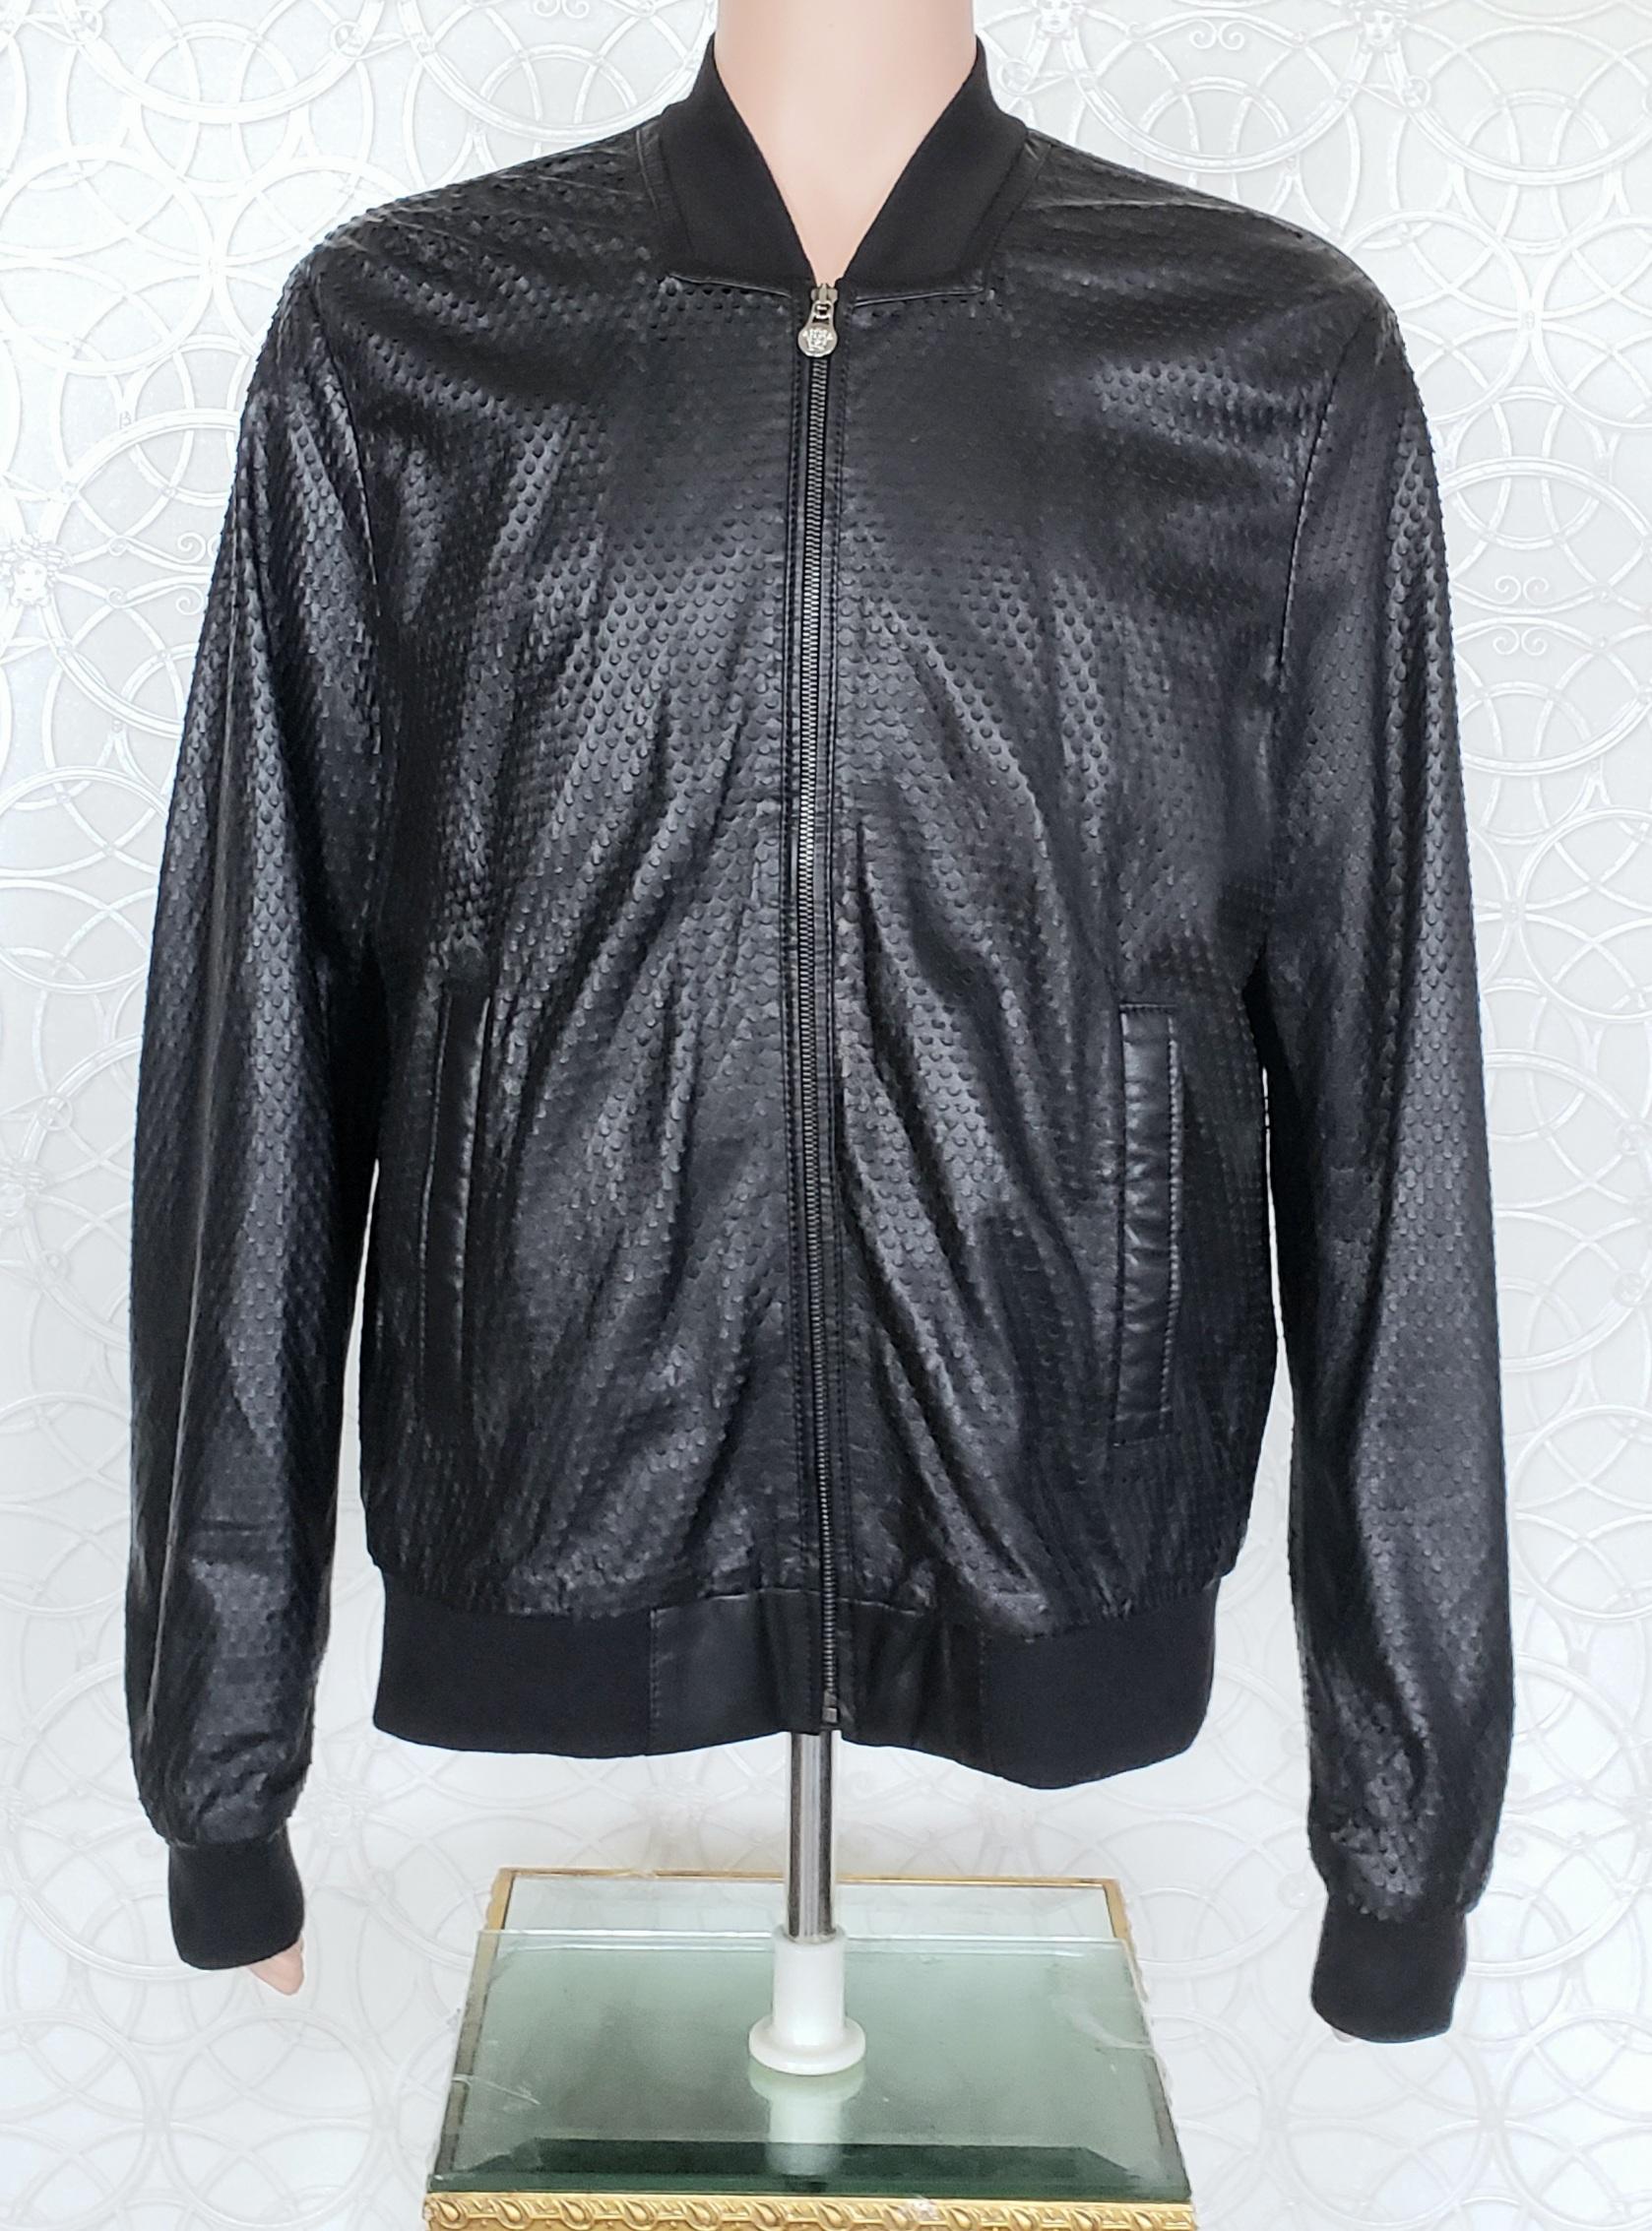 New VERSACE COLLECTION PERFORATED LAMB LEATHER BLACK BOMBER JACKET 56 - 3XL For Sale 1